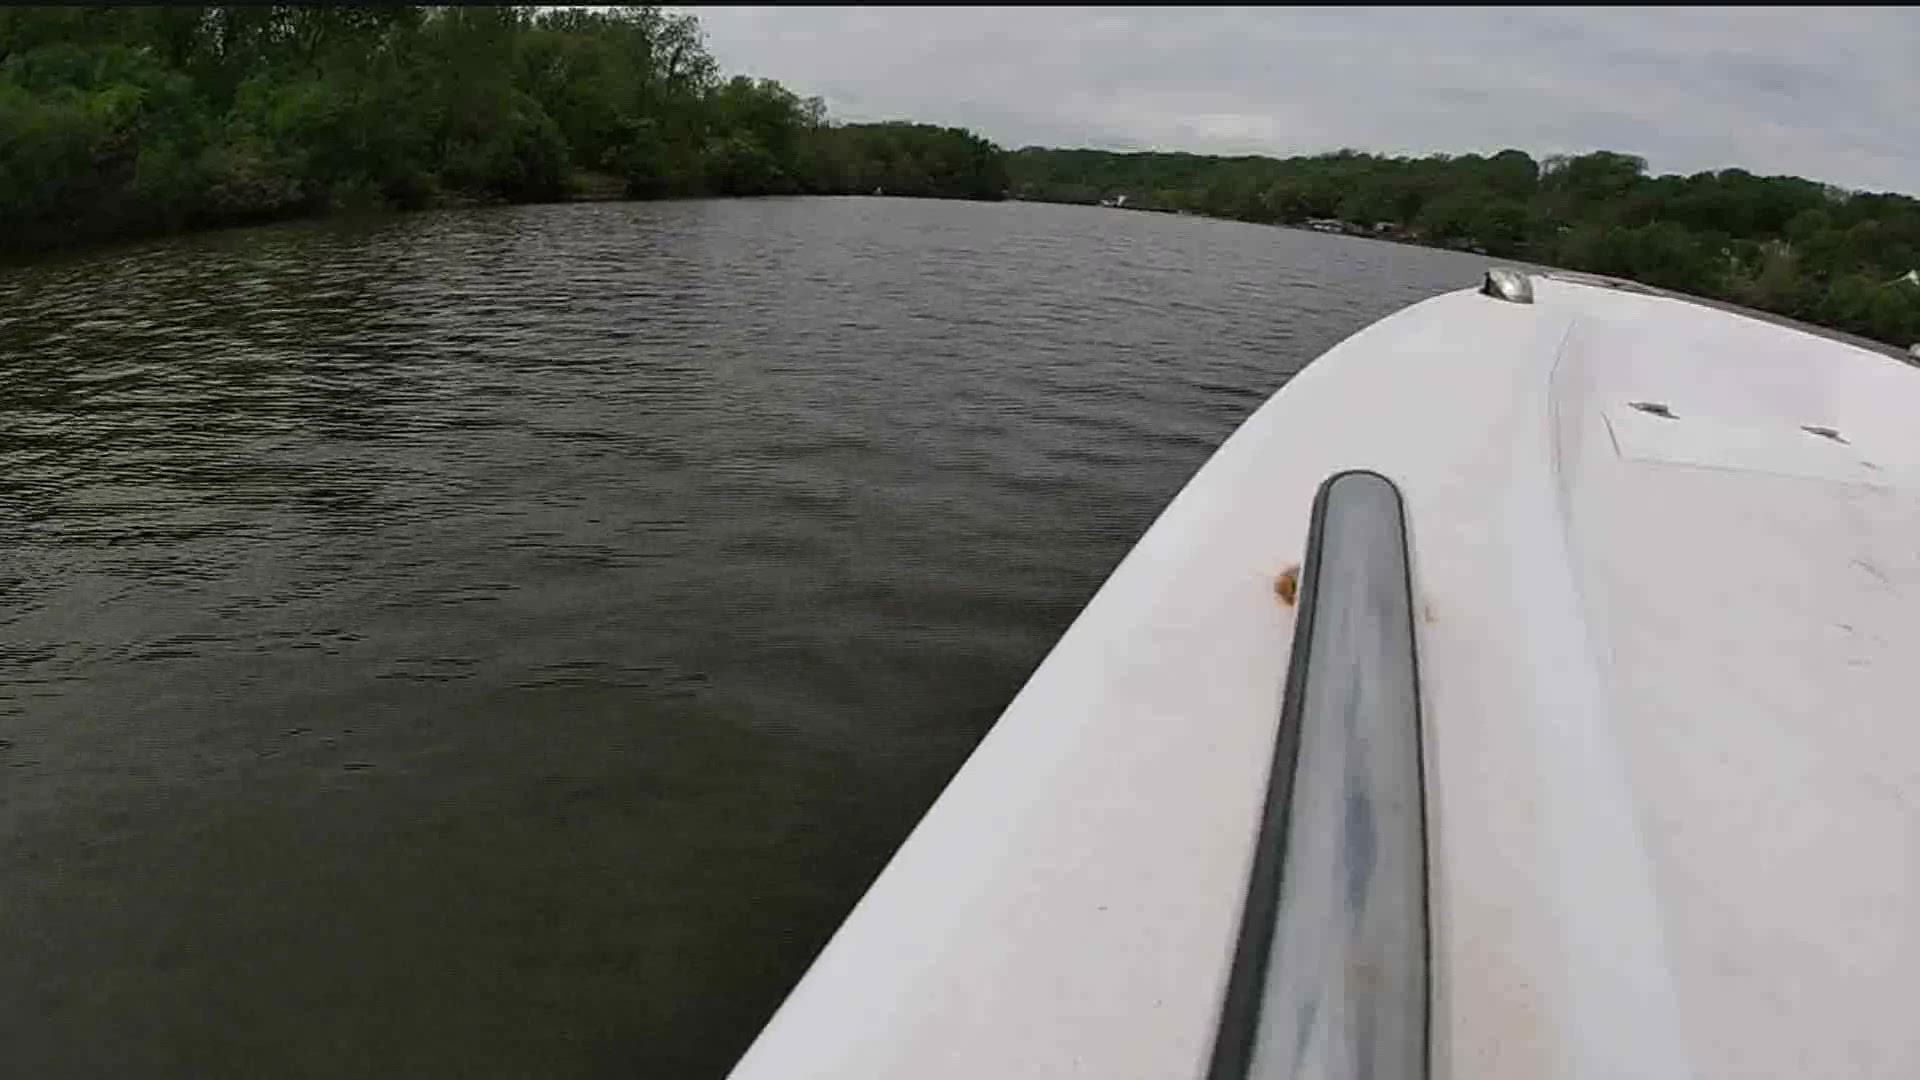 Two states, two different boating restrictions along the Mississippi River dividing line.